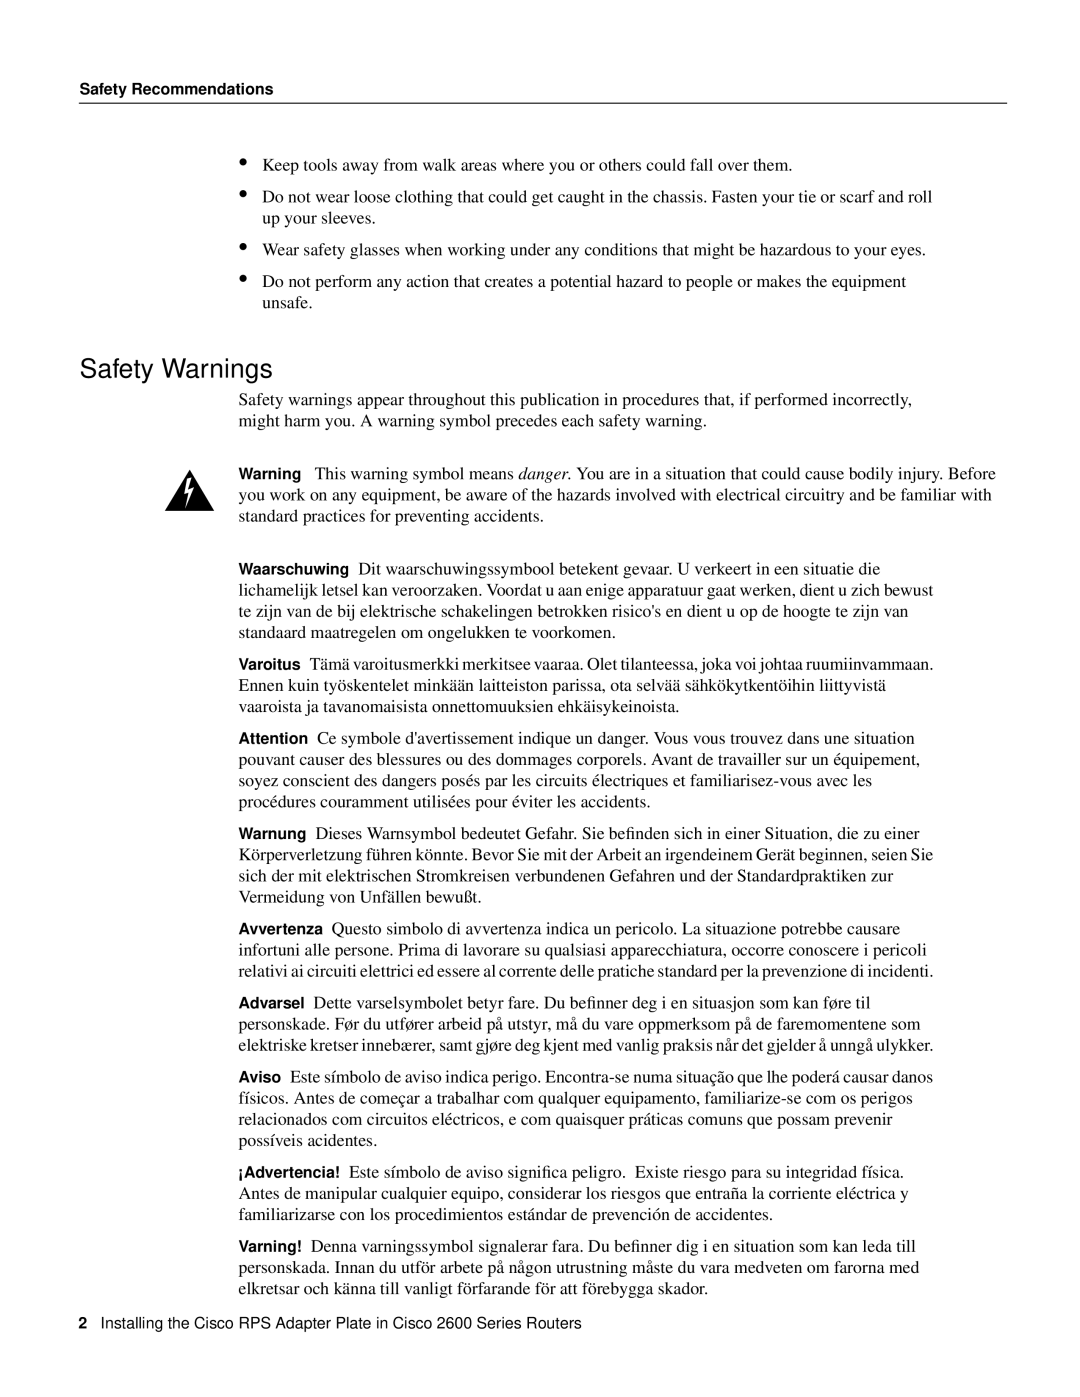 Cisco Systems 2600 Series manual Safety Warnings, Safety Recommendations 